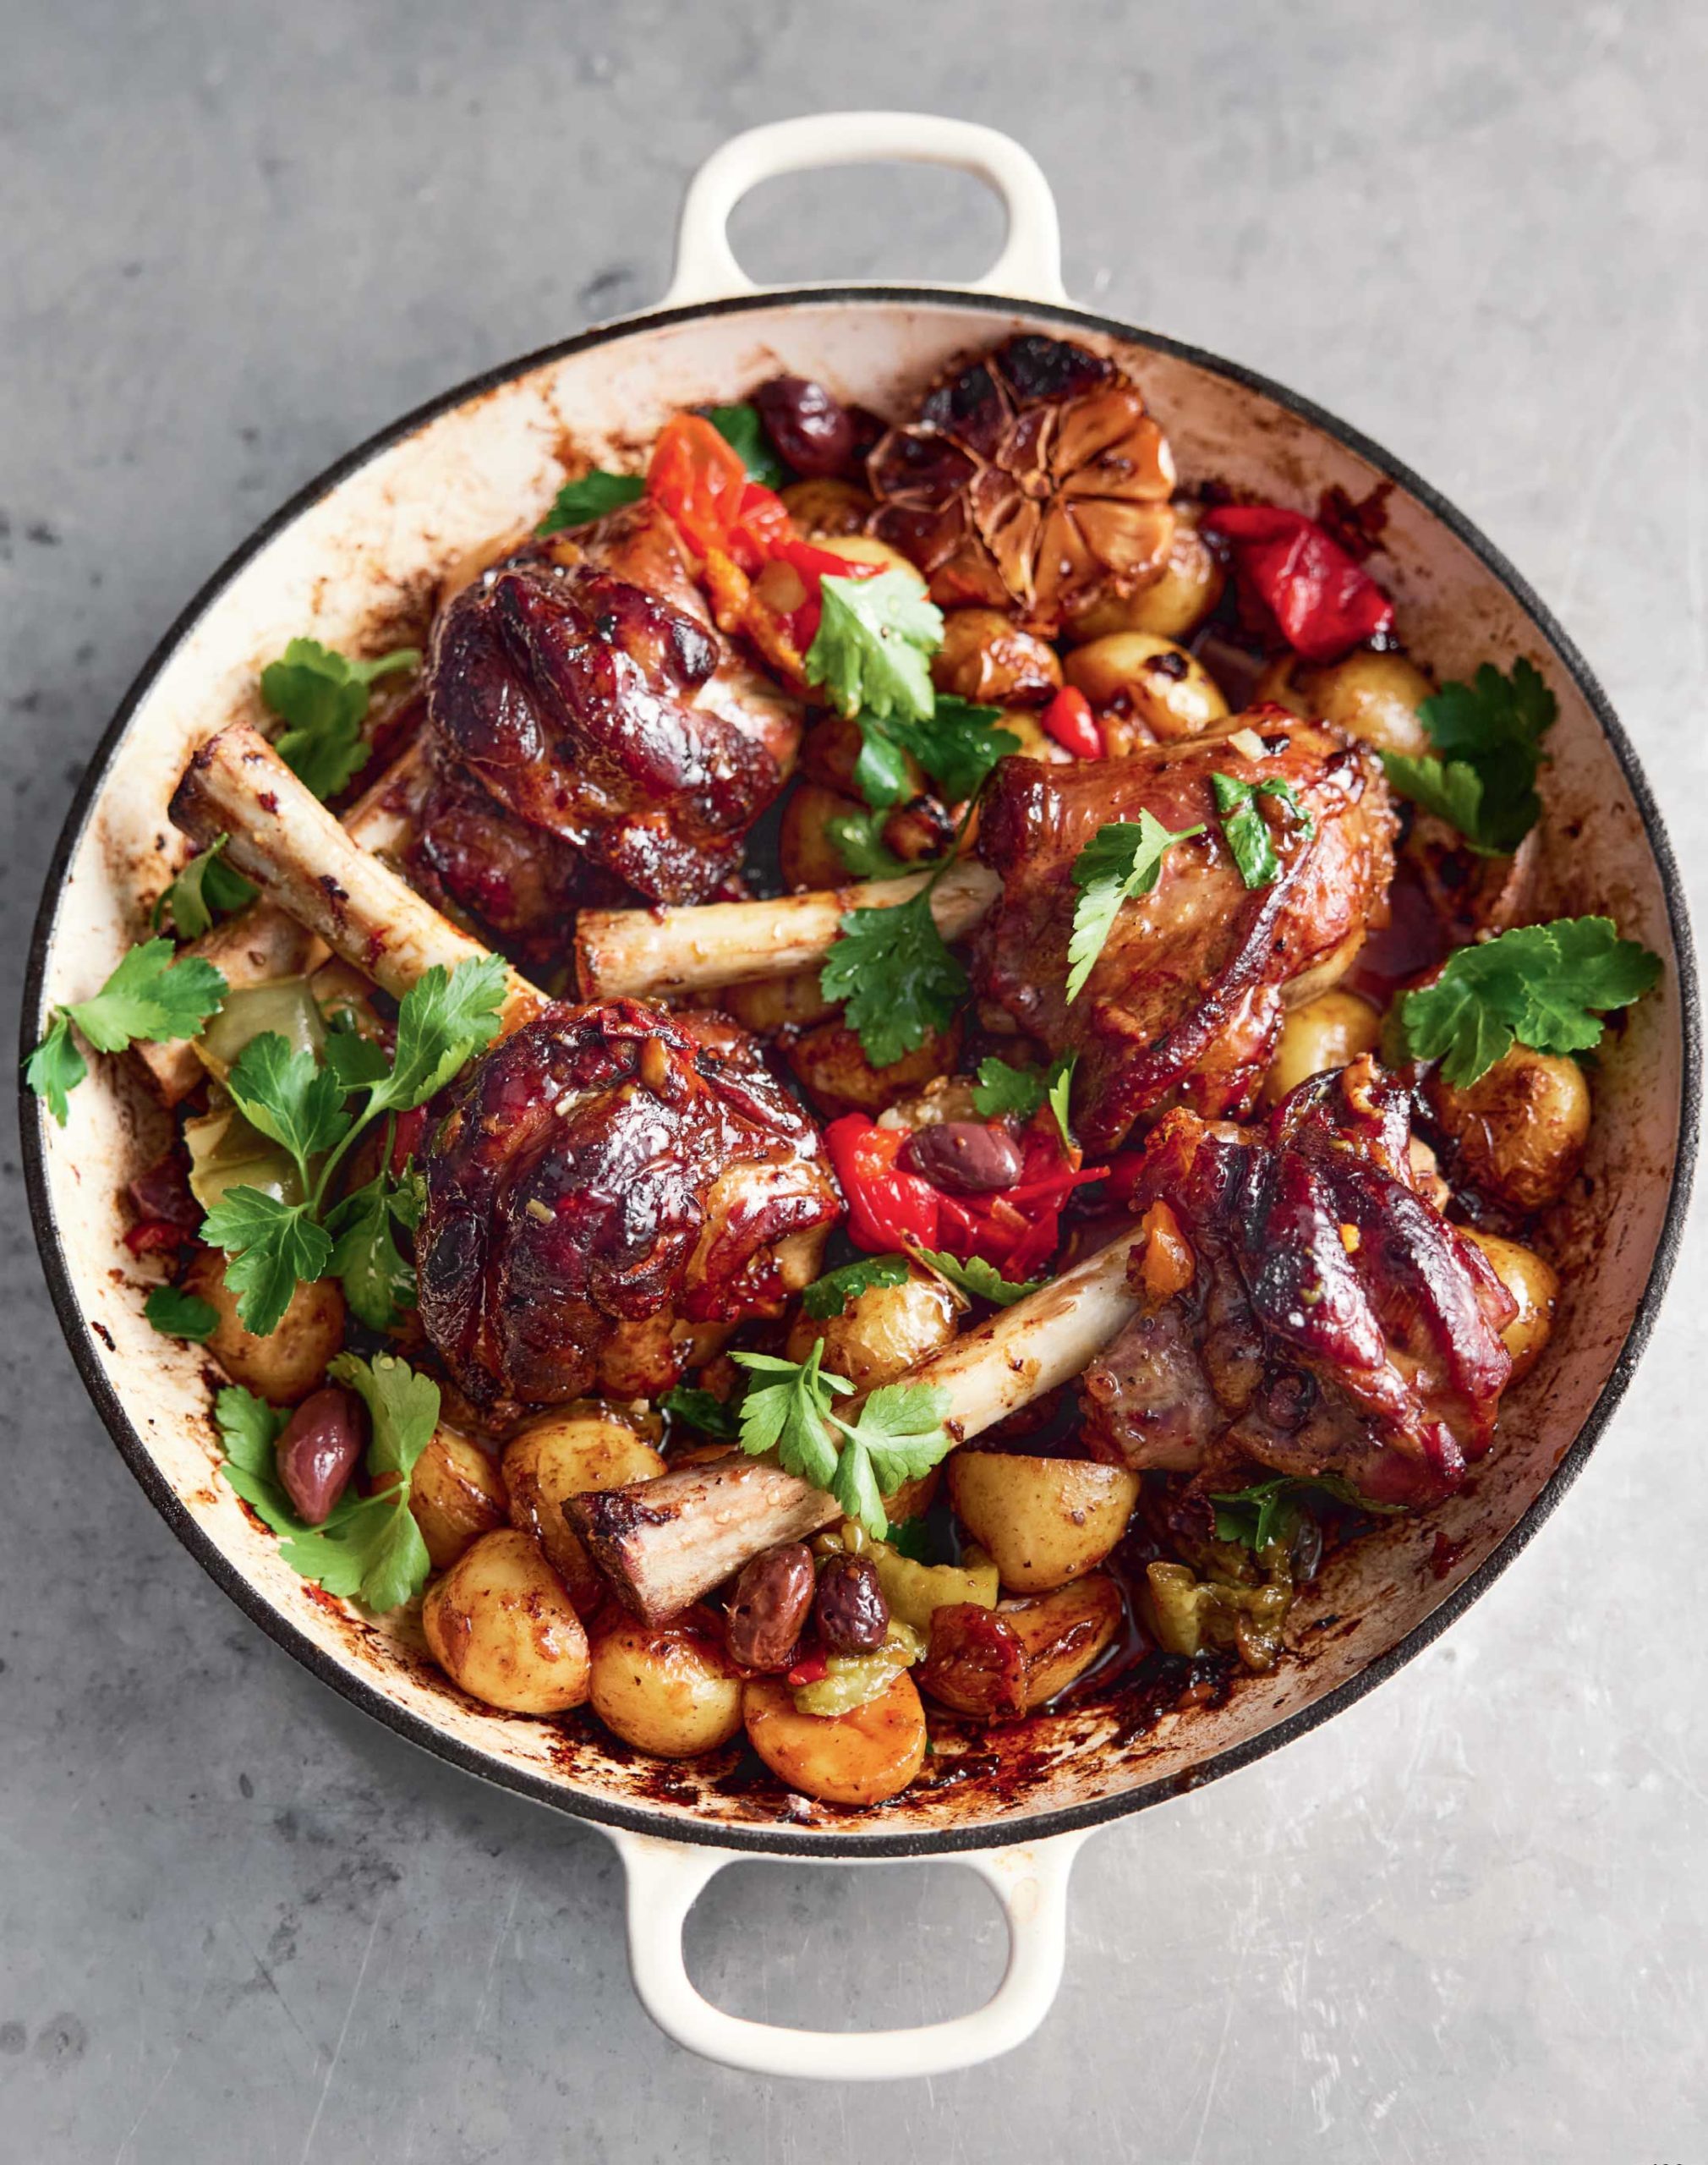 Jamie Oliver's five delicious one-pan recipes to cook for your